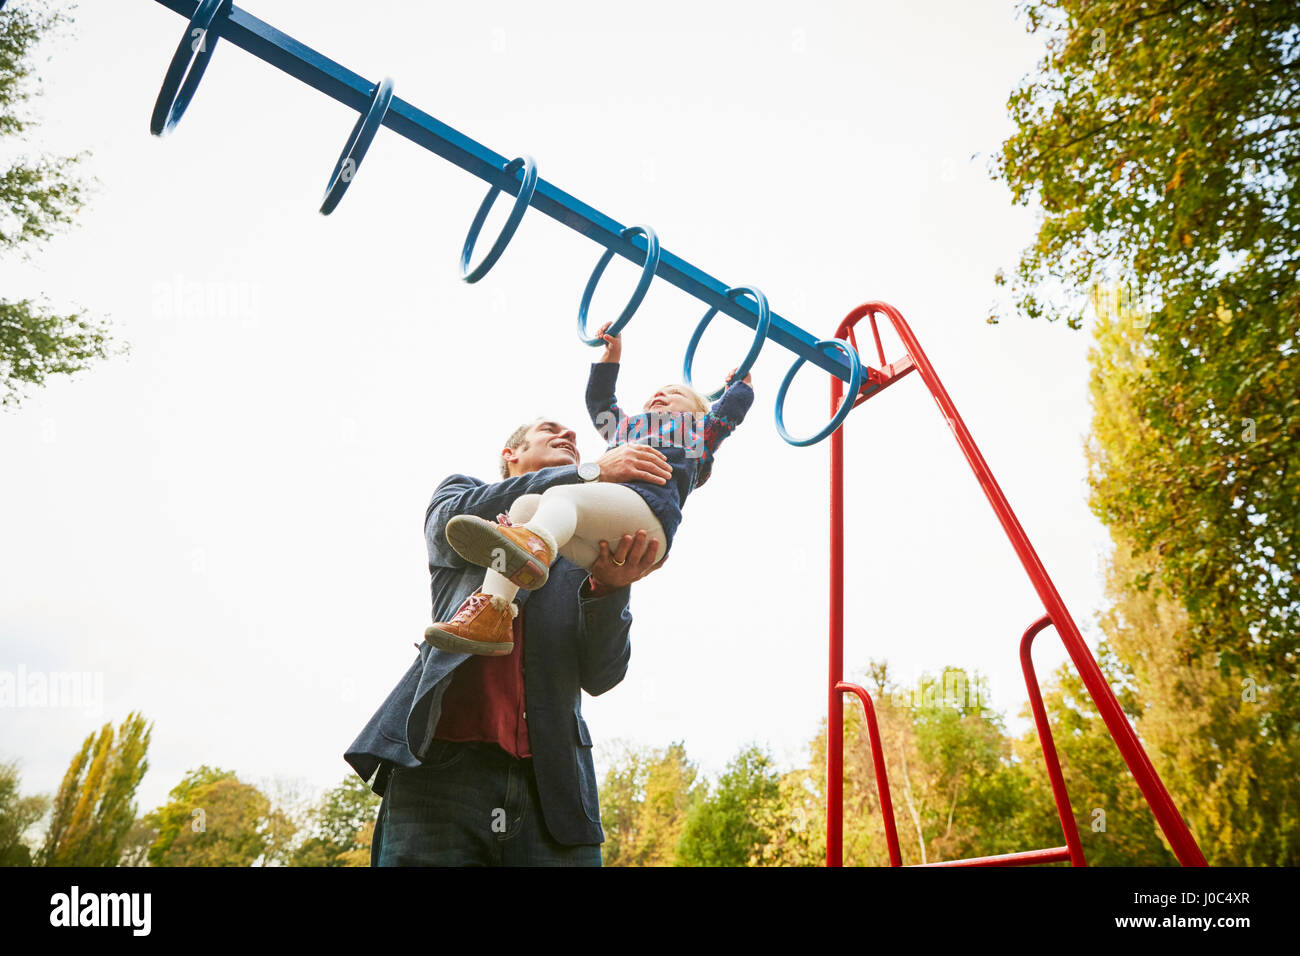 Father helping daughter on monkey bars in playground Stock Photo